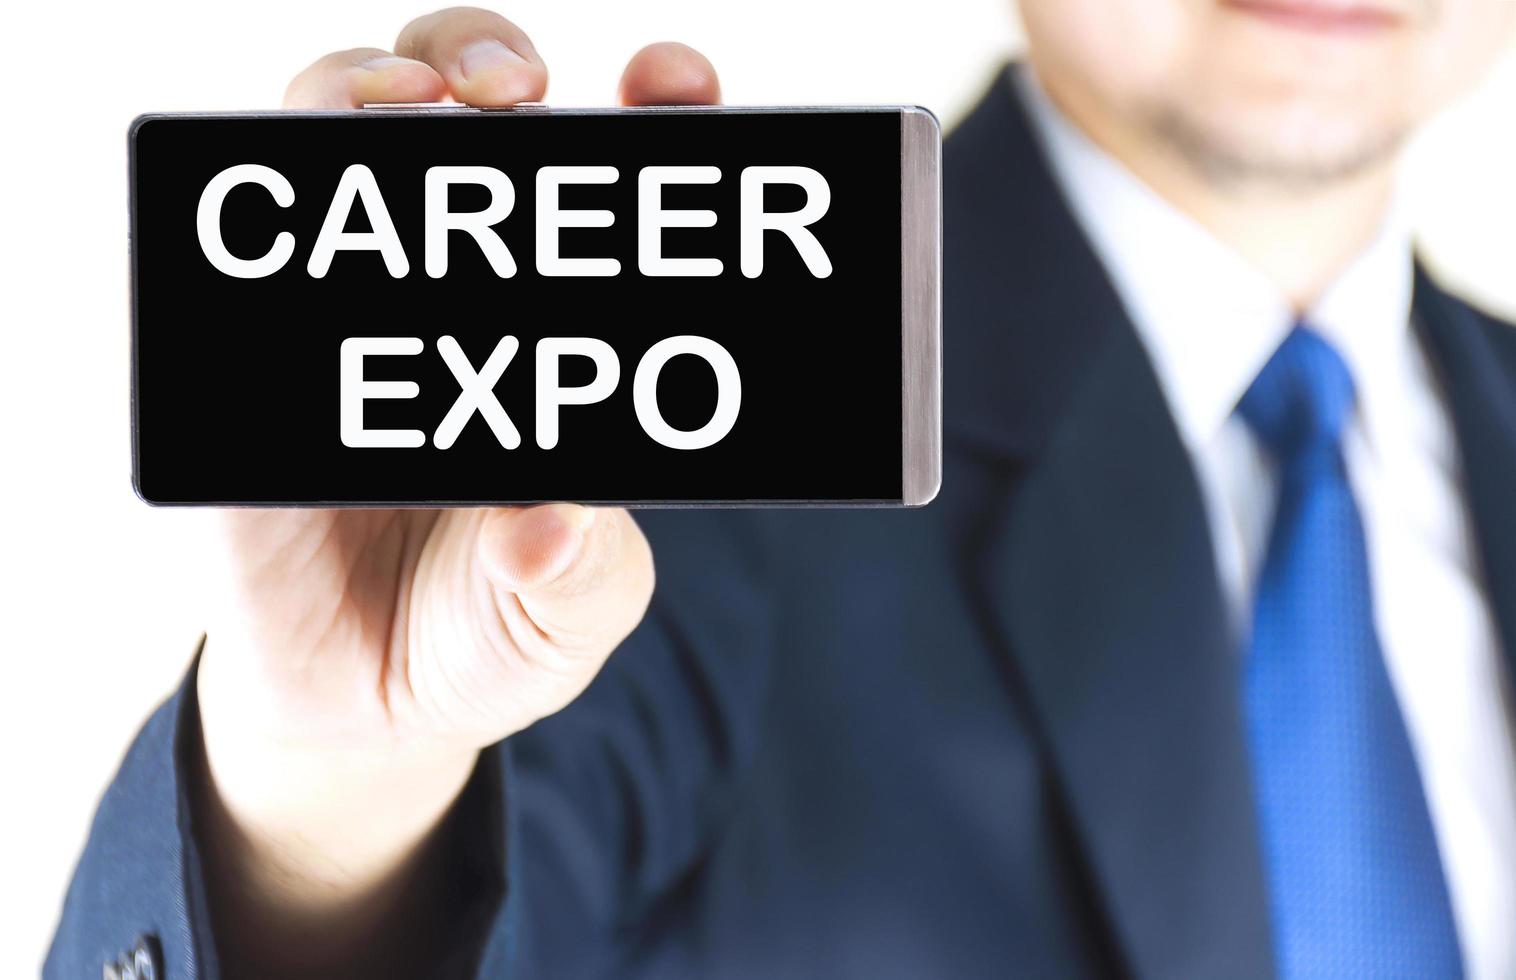 CAREER EXPO word on mobile phone screen in blurred young businessman hand over white background, business concept photo